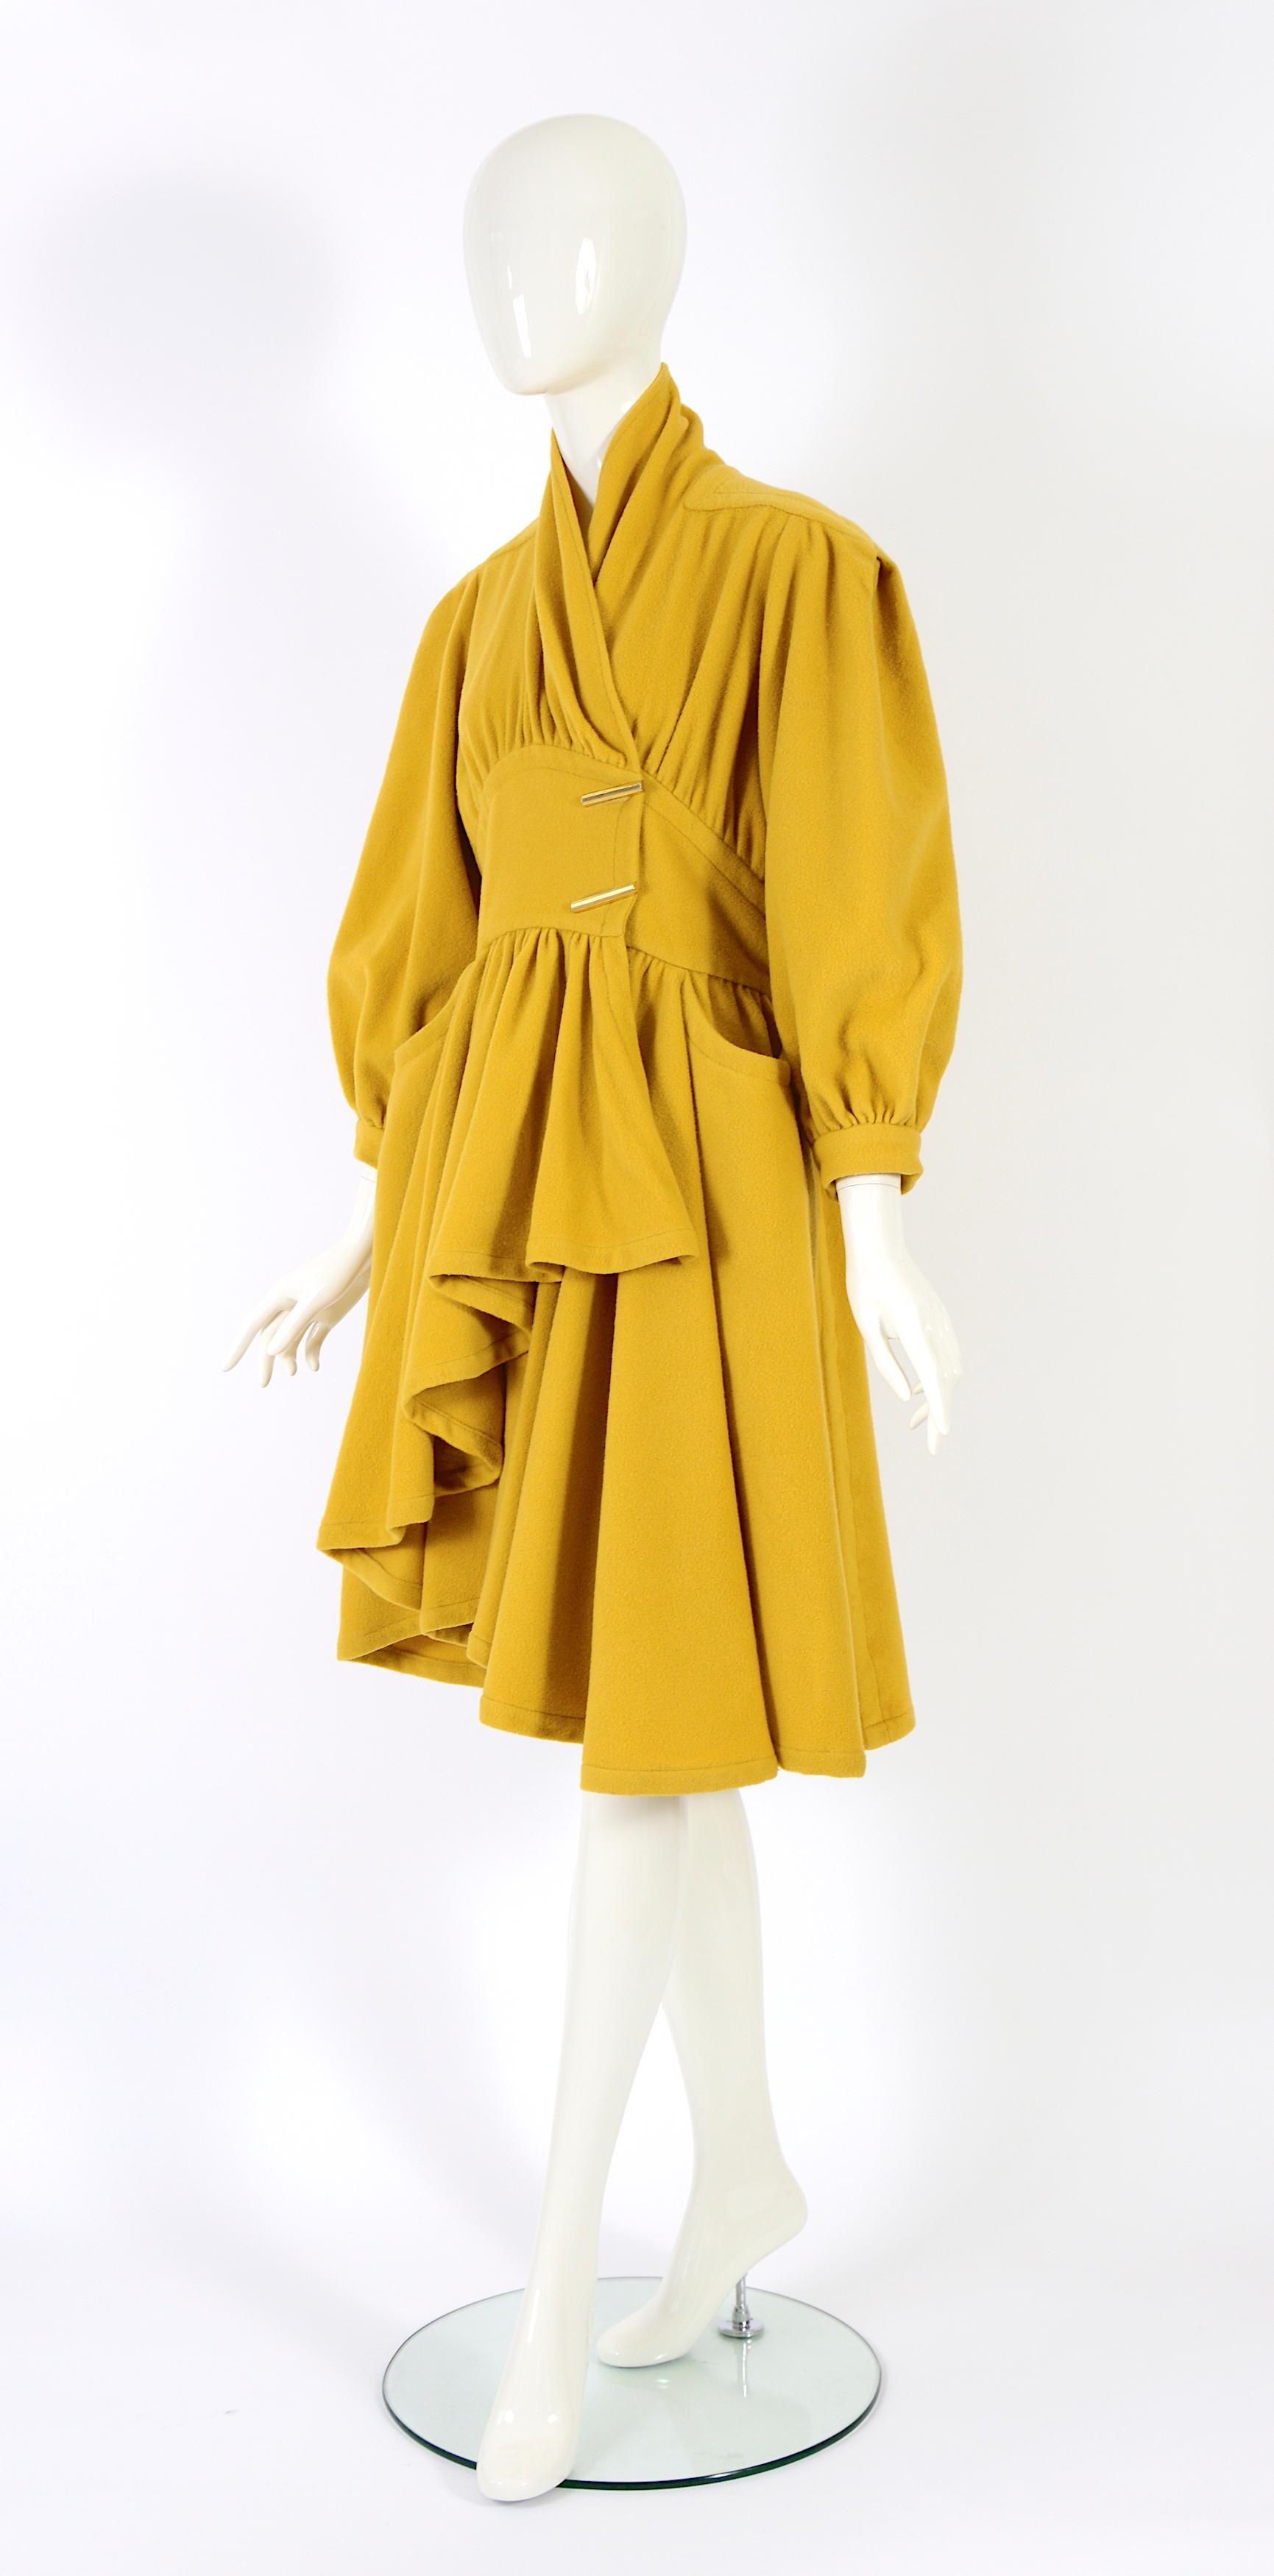 Documented Thierry Mugler Fall Winter 1983 runway, mustard yellow wool coat, with massive shoulders, graduated gathered skirt cut short at the front, broad curving waistband with two gilt bar fasteners.
Made in wool - No size label - approximately